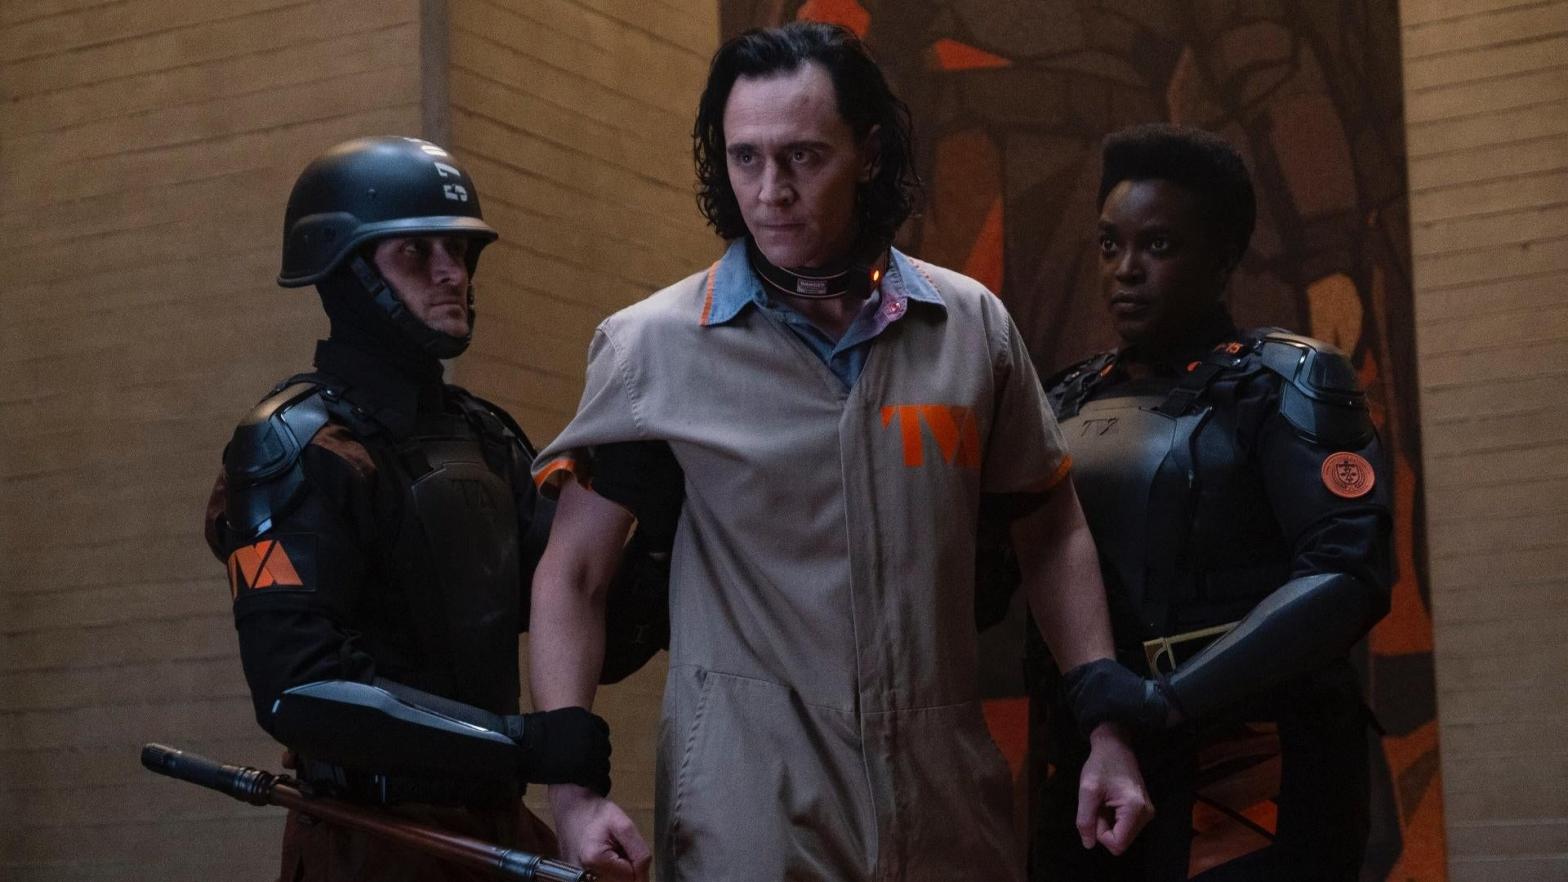 Loki is under lock and key in the new show. (Photo: Marvel Studios)